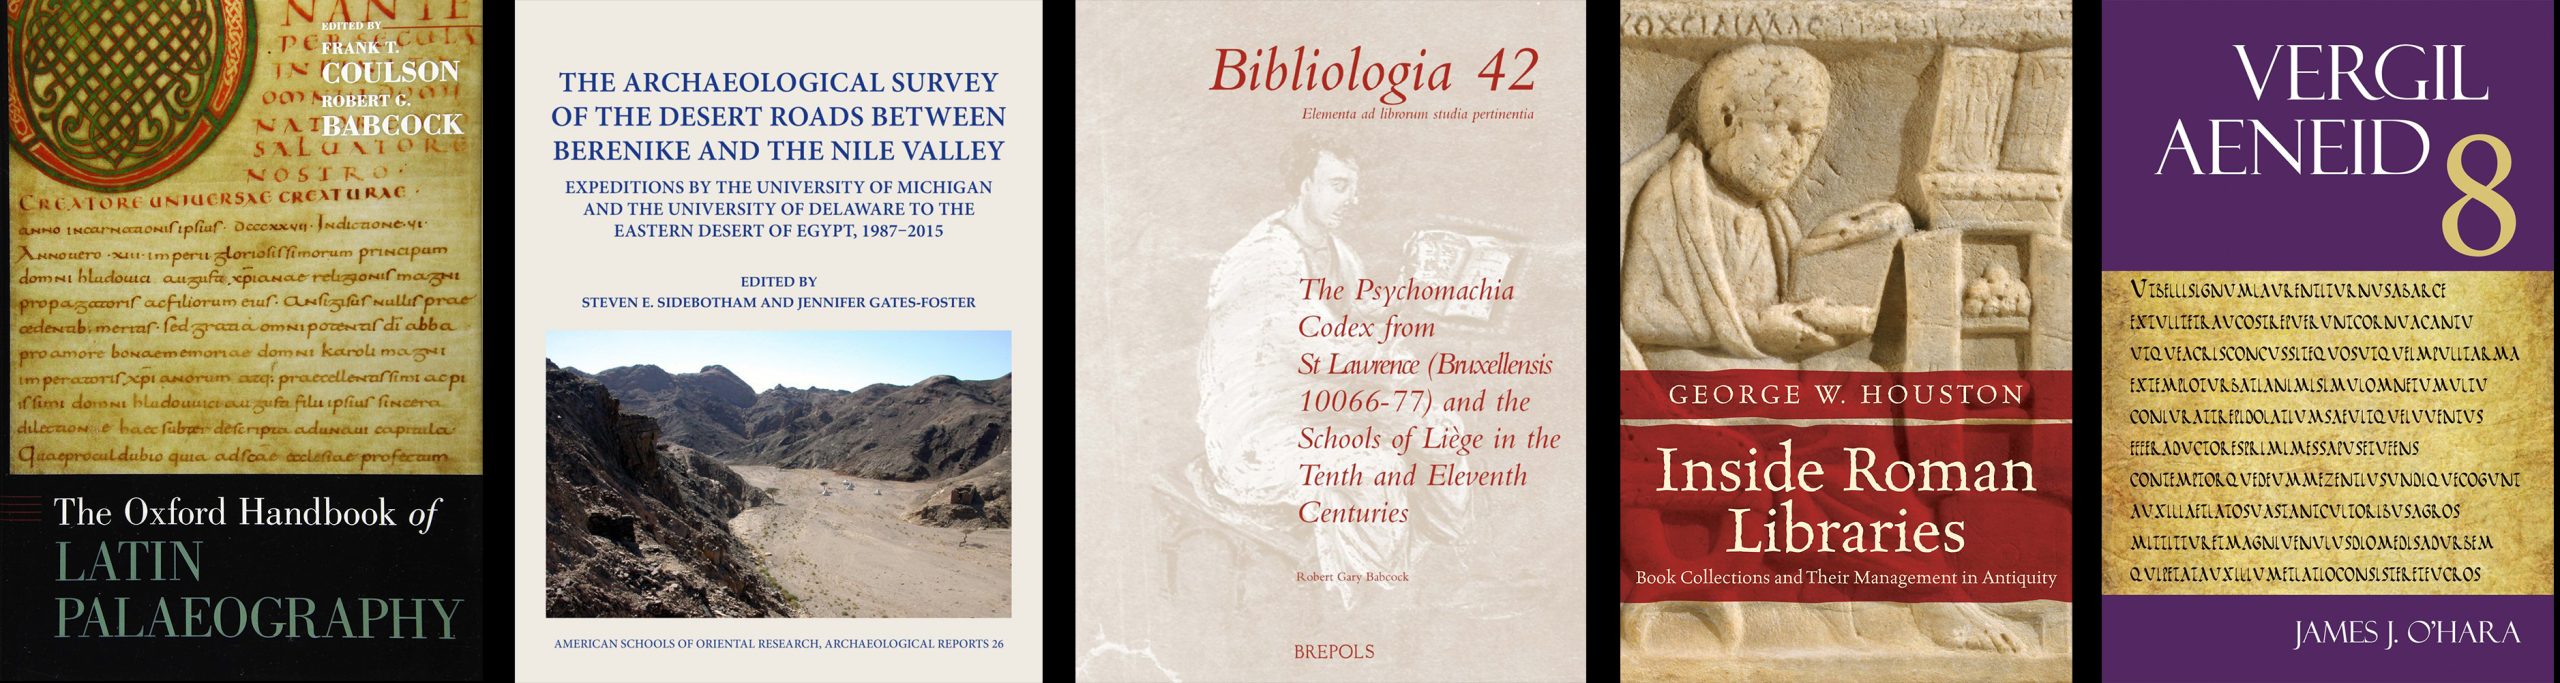 1. The Oxford Handbook of Latin Palaeography. 2. The Archaeology Survey of the Desert Roads between Berenike and the Nile Valley edited by Steven E. Sidebotham and Jennifer Gates-Foster. 3. Bibliogica 42: The Psychomania Codex from St. Laurence (Bruxellensis 10066-77) and the Schools of Liege in the Tenth and Eleventh Centuries by Robert Gary Babcock. 4. Inside Roman Libraries by George W. Houston. 5. Vergil: Aeneid 8 by James J. O'Hara.